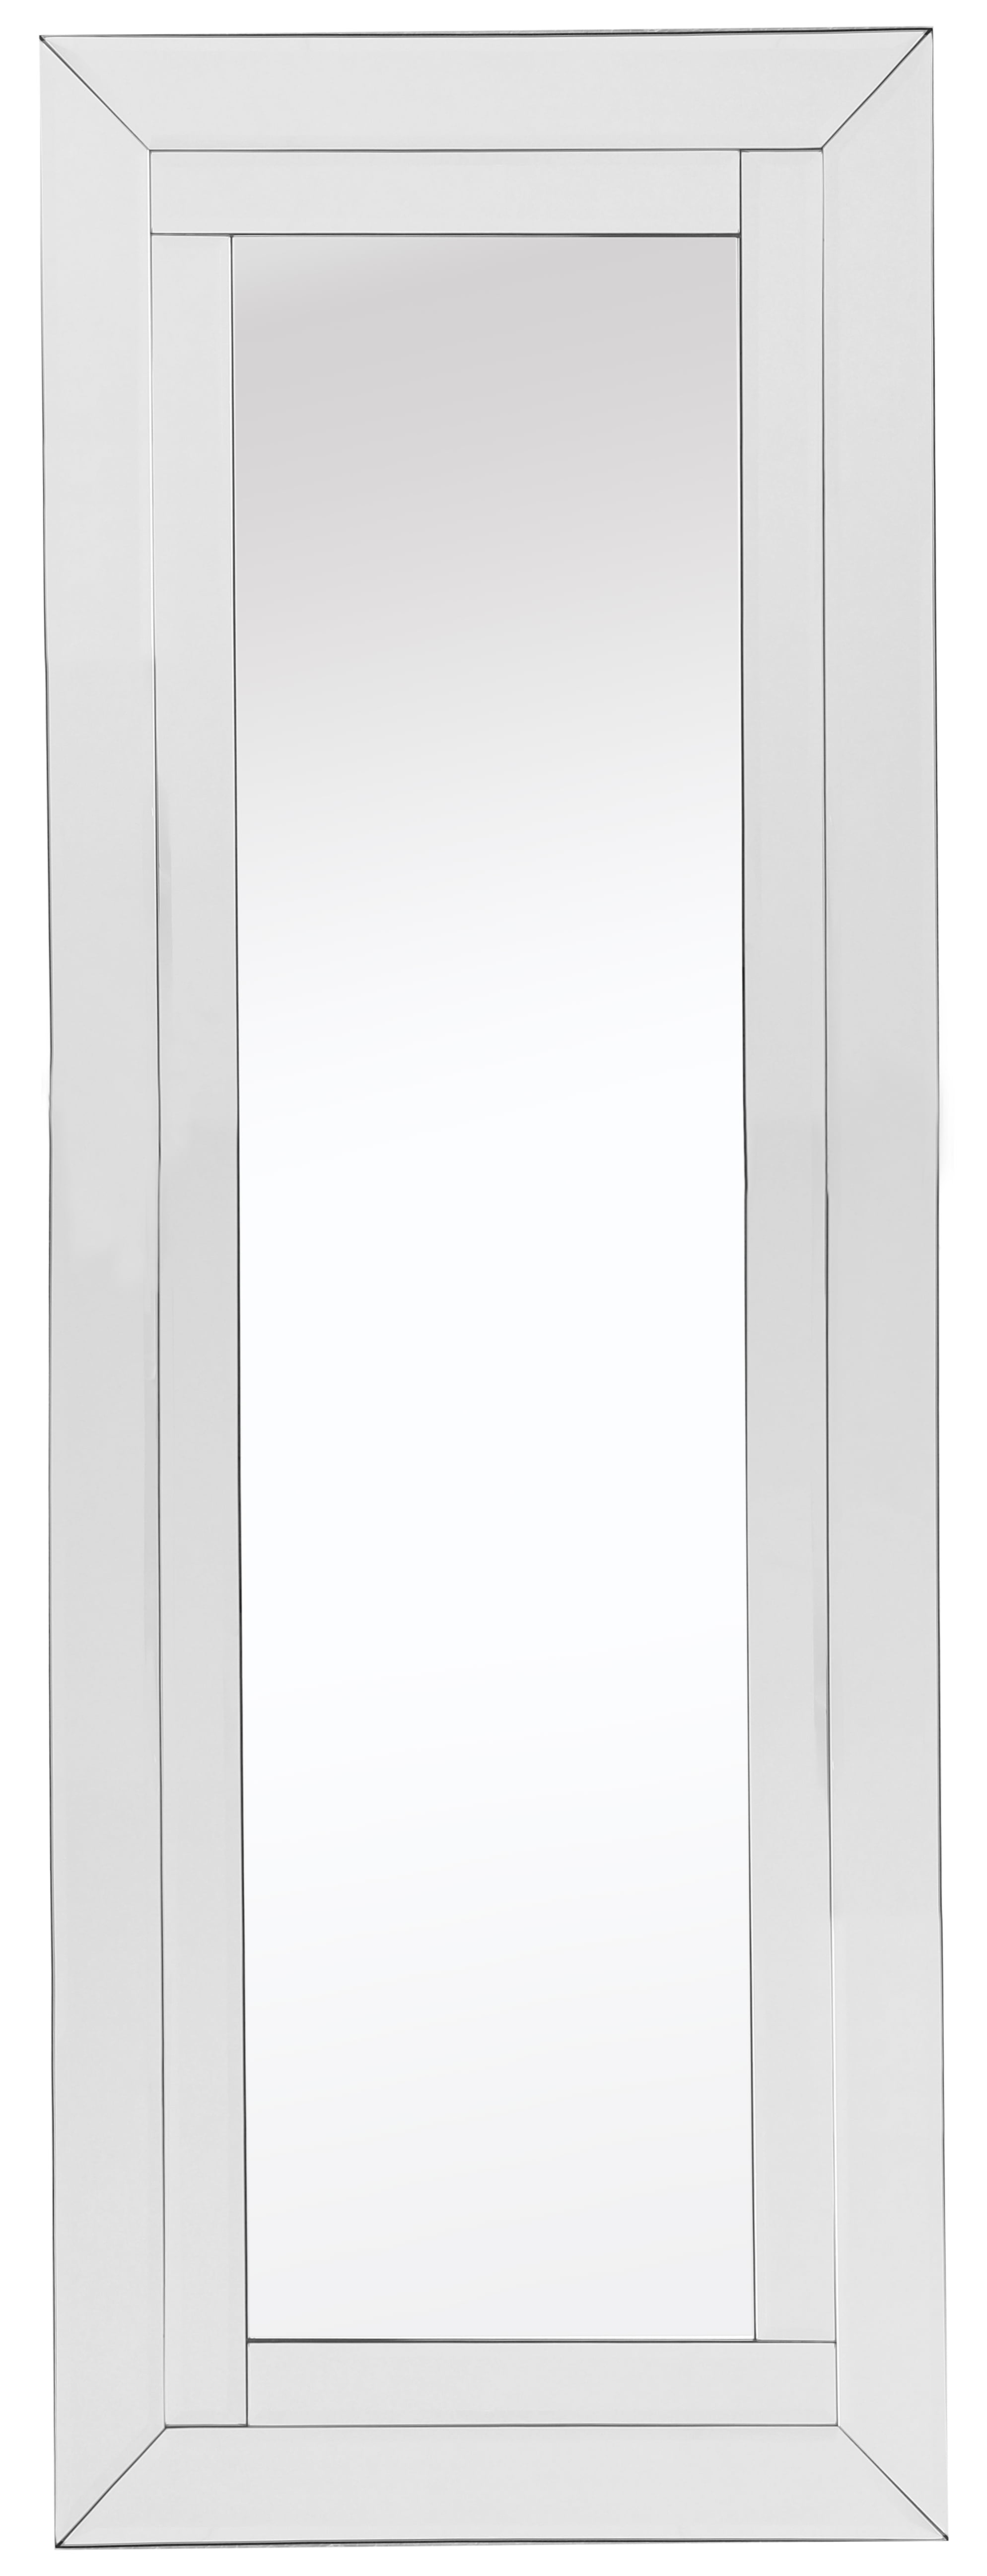 86306 16 X 48 In. Lincoln Classic Frame Beveled Accent Mirror, Silver